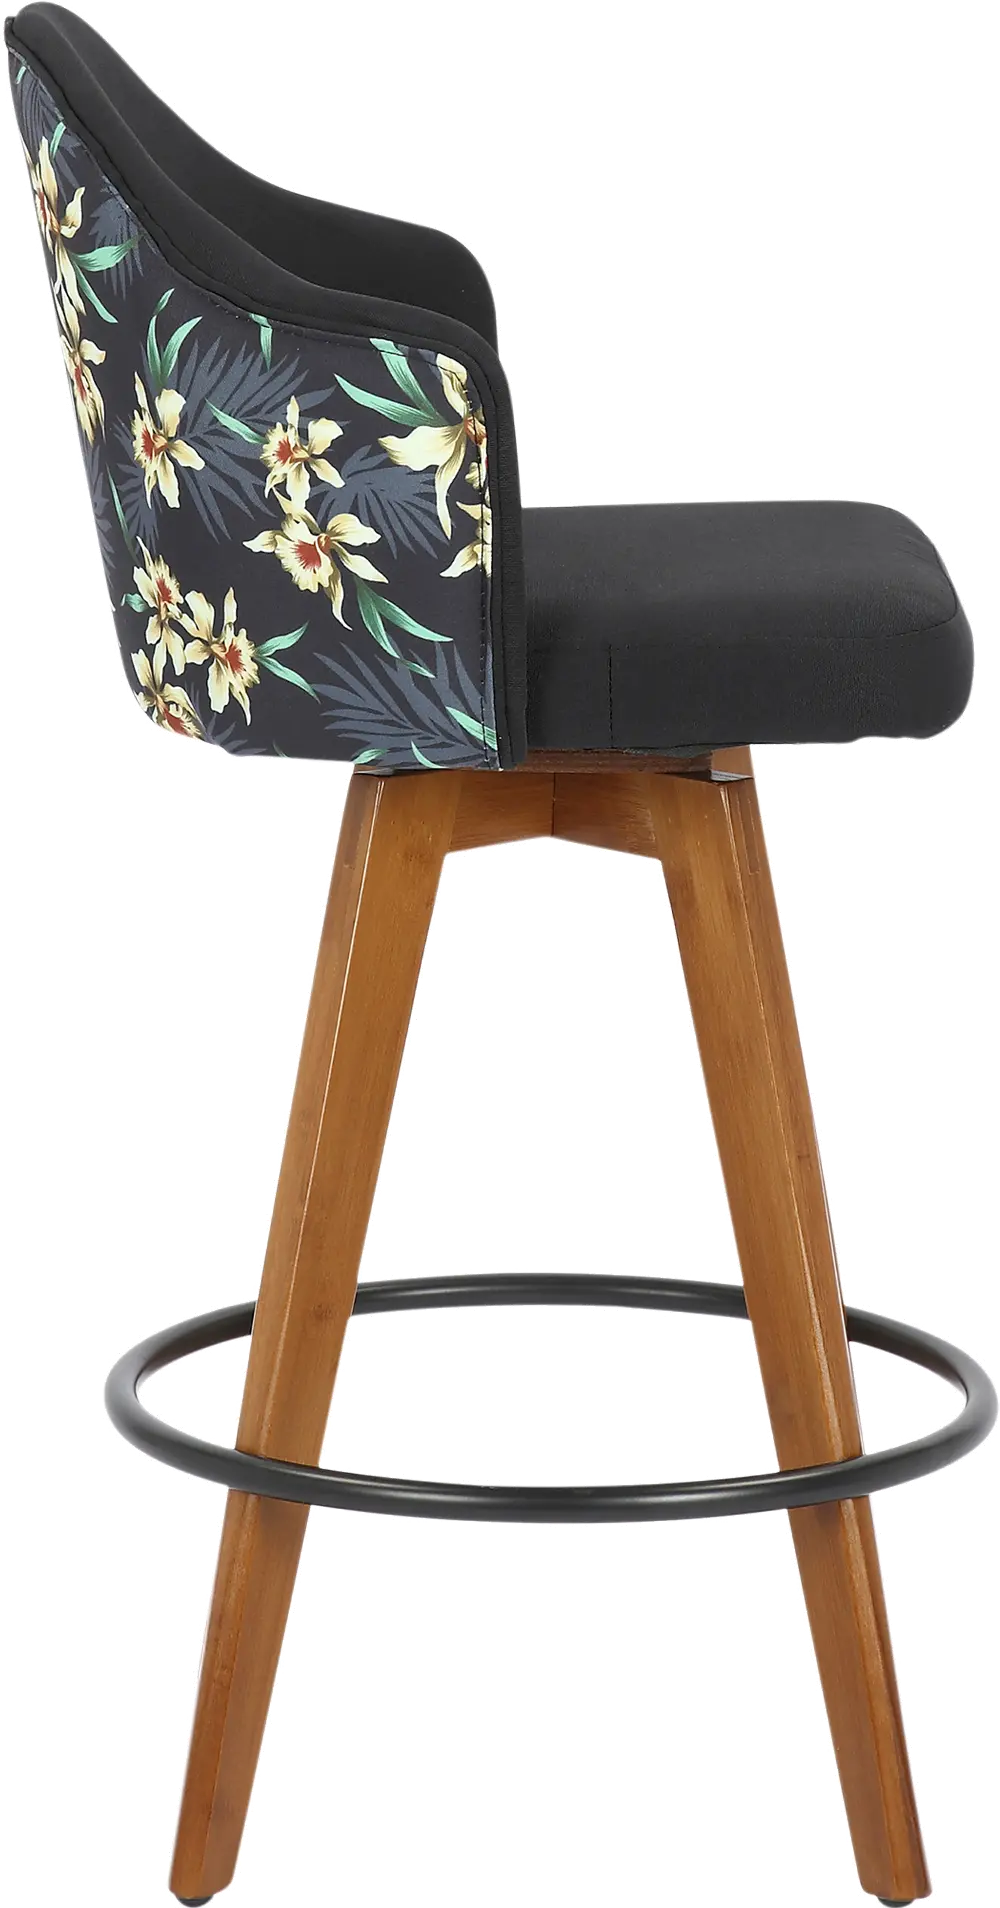 B26-AHOY FLORAL WLBK Contemporary Black and Floral Decorative Swivel Counter Height Stool - Ahoy-1